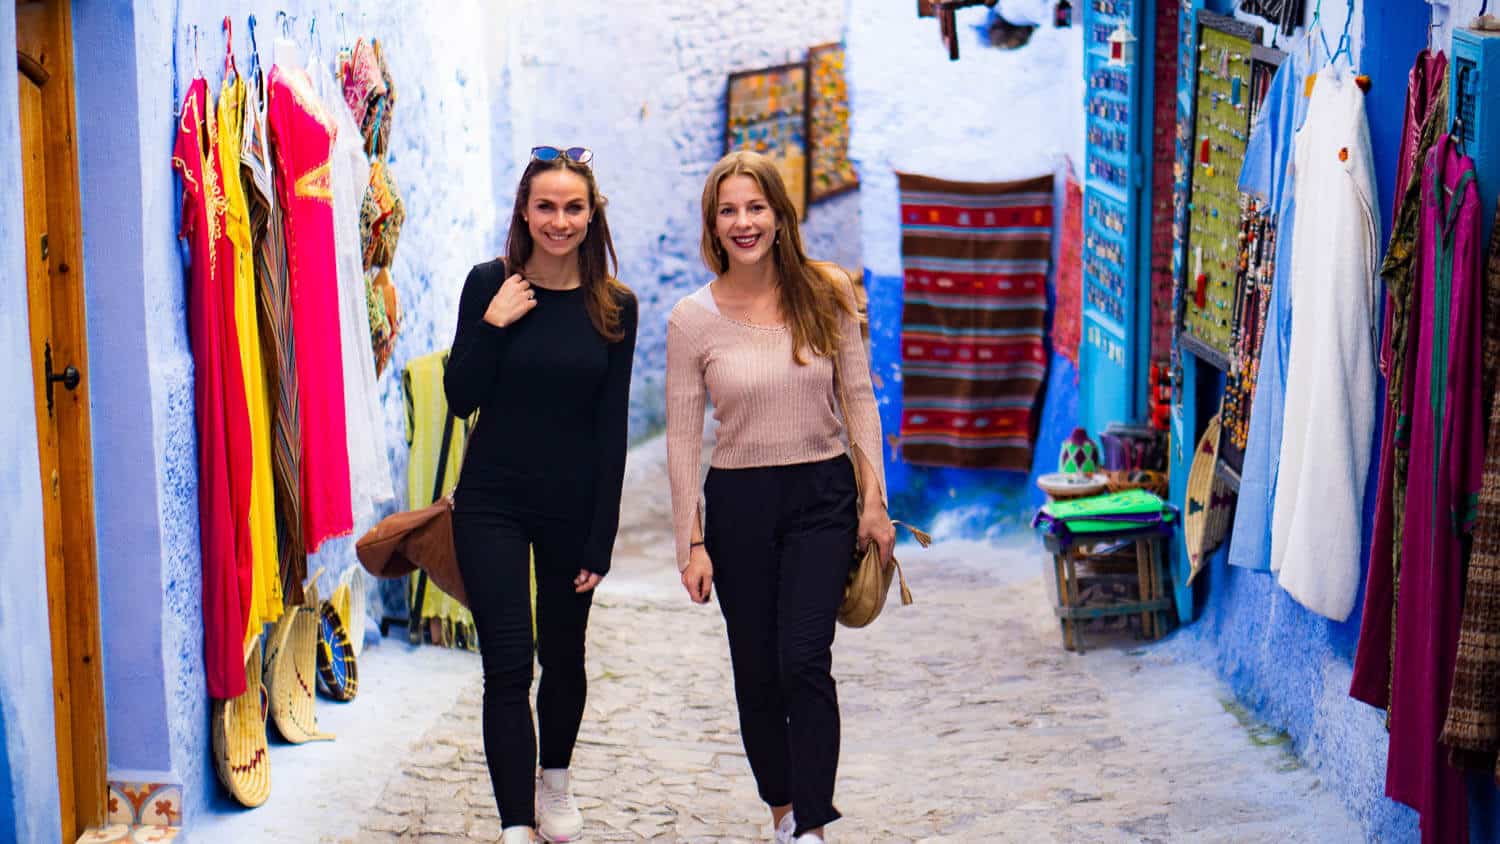 us walking in Chefchouen, the blue city in Morocco